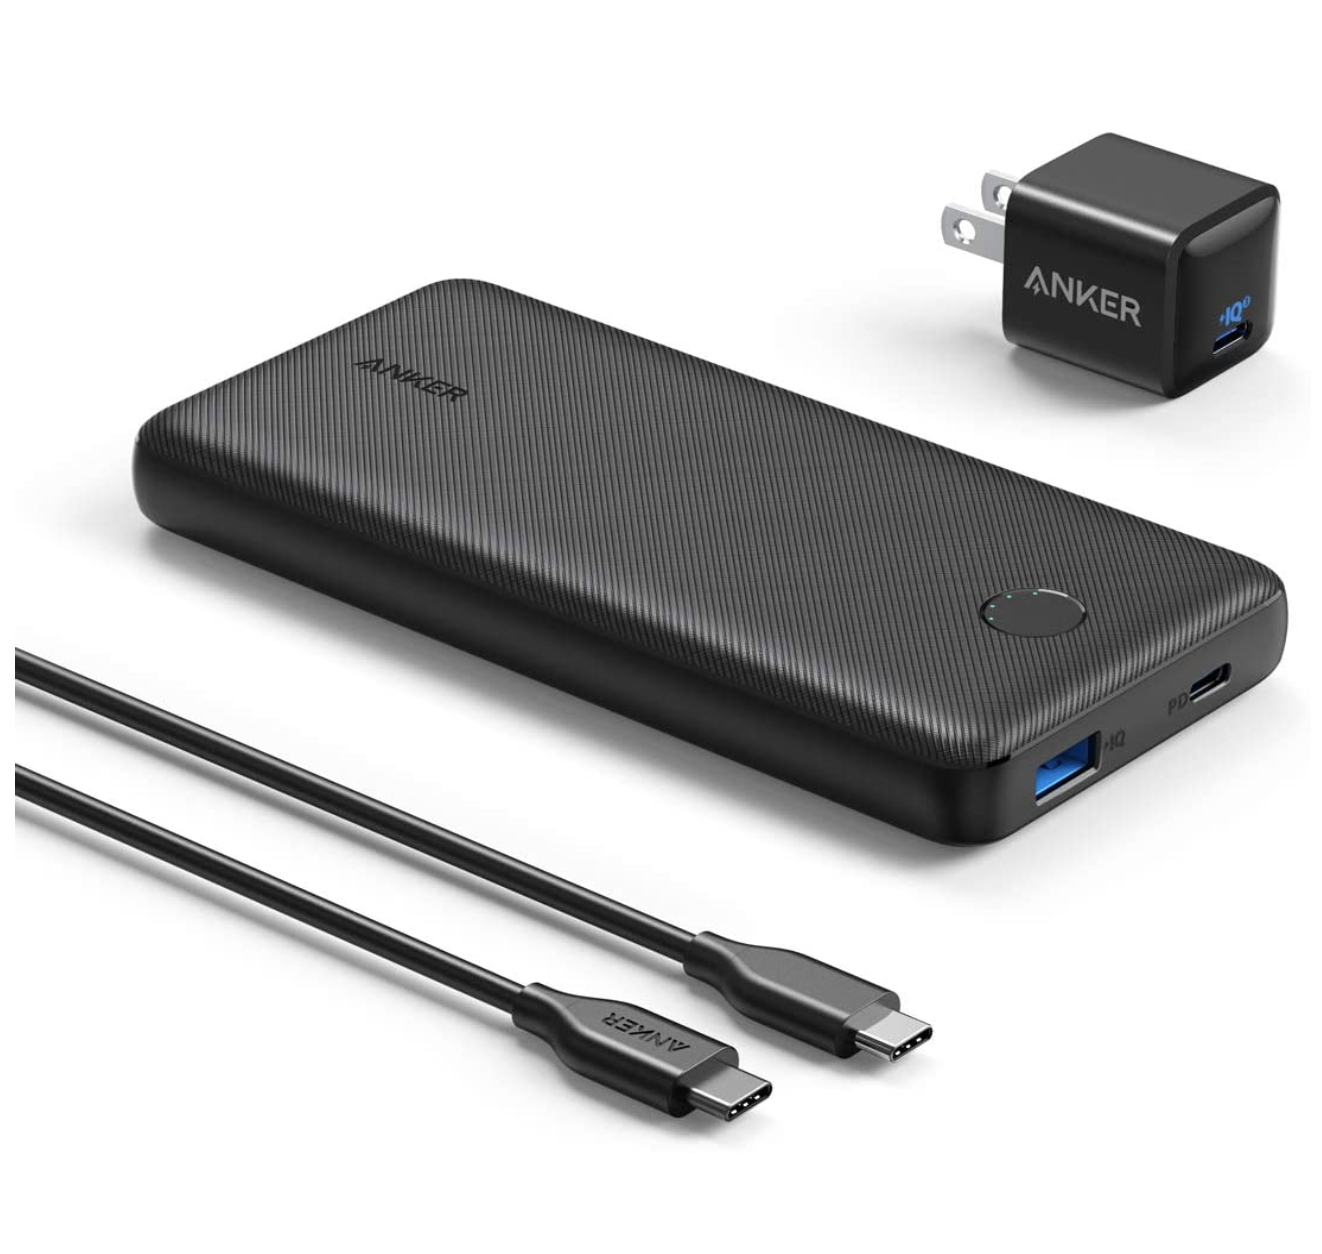 Primary image for Anker Portable Charger PowerCore Essential 20000 PD (18W) Power Bank with 18W US